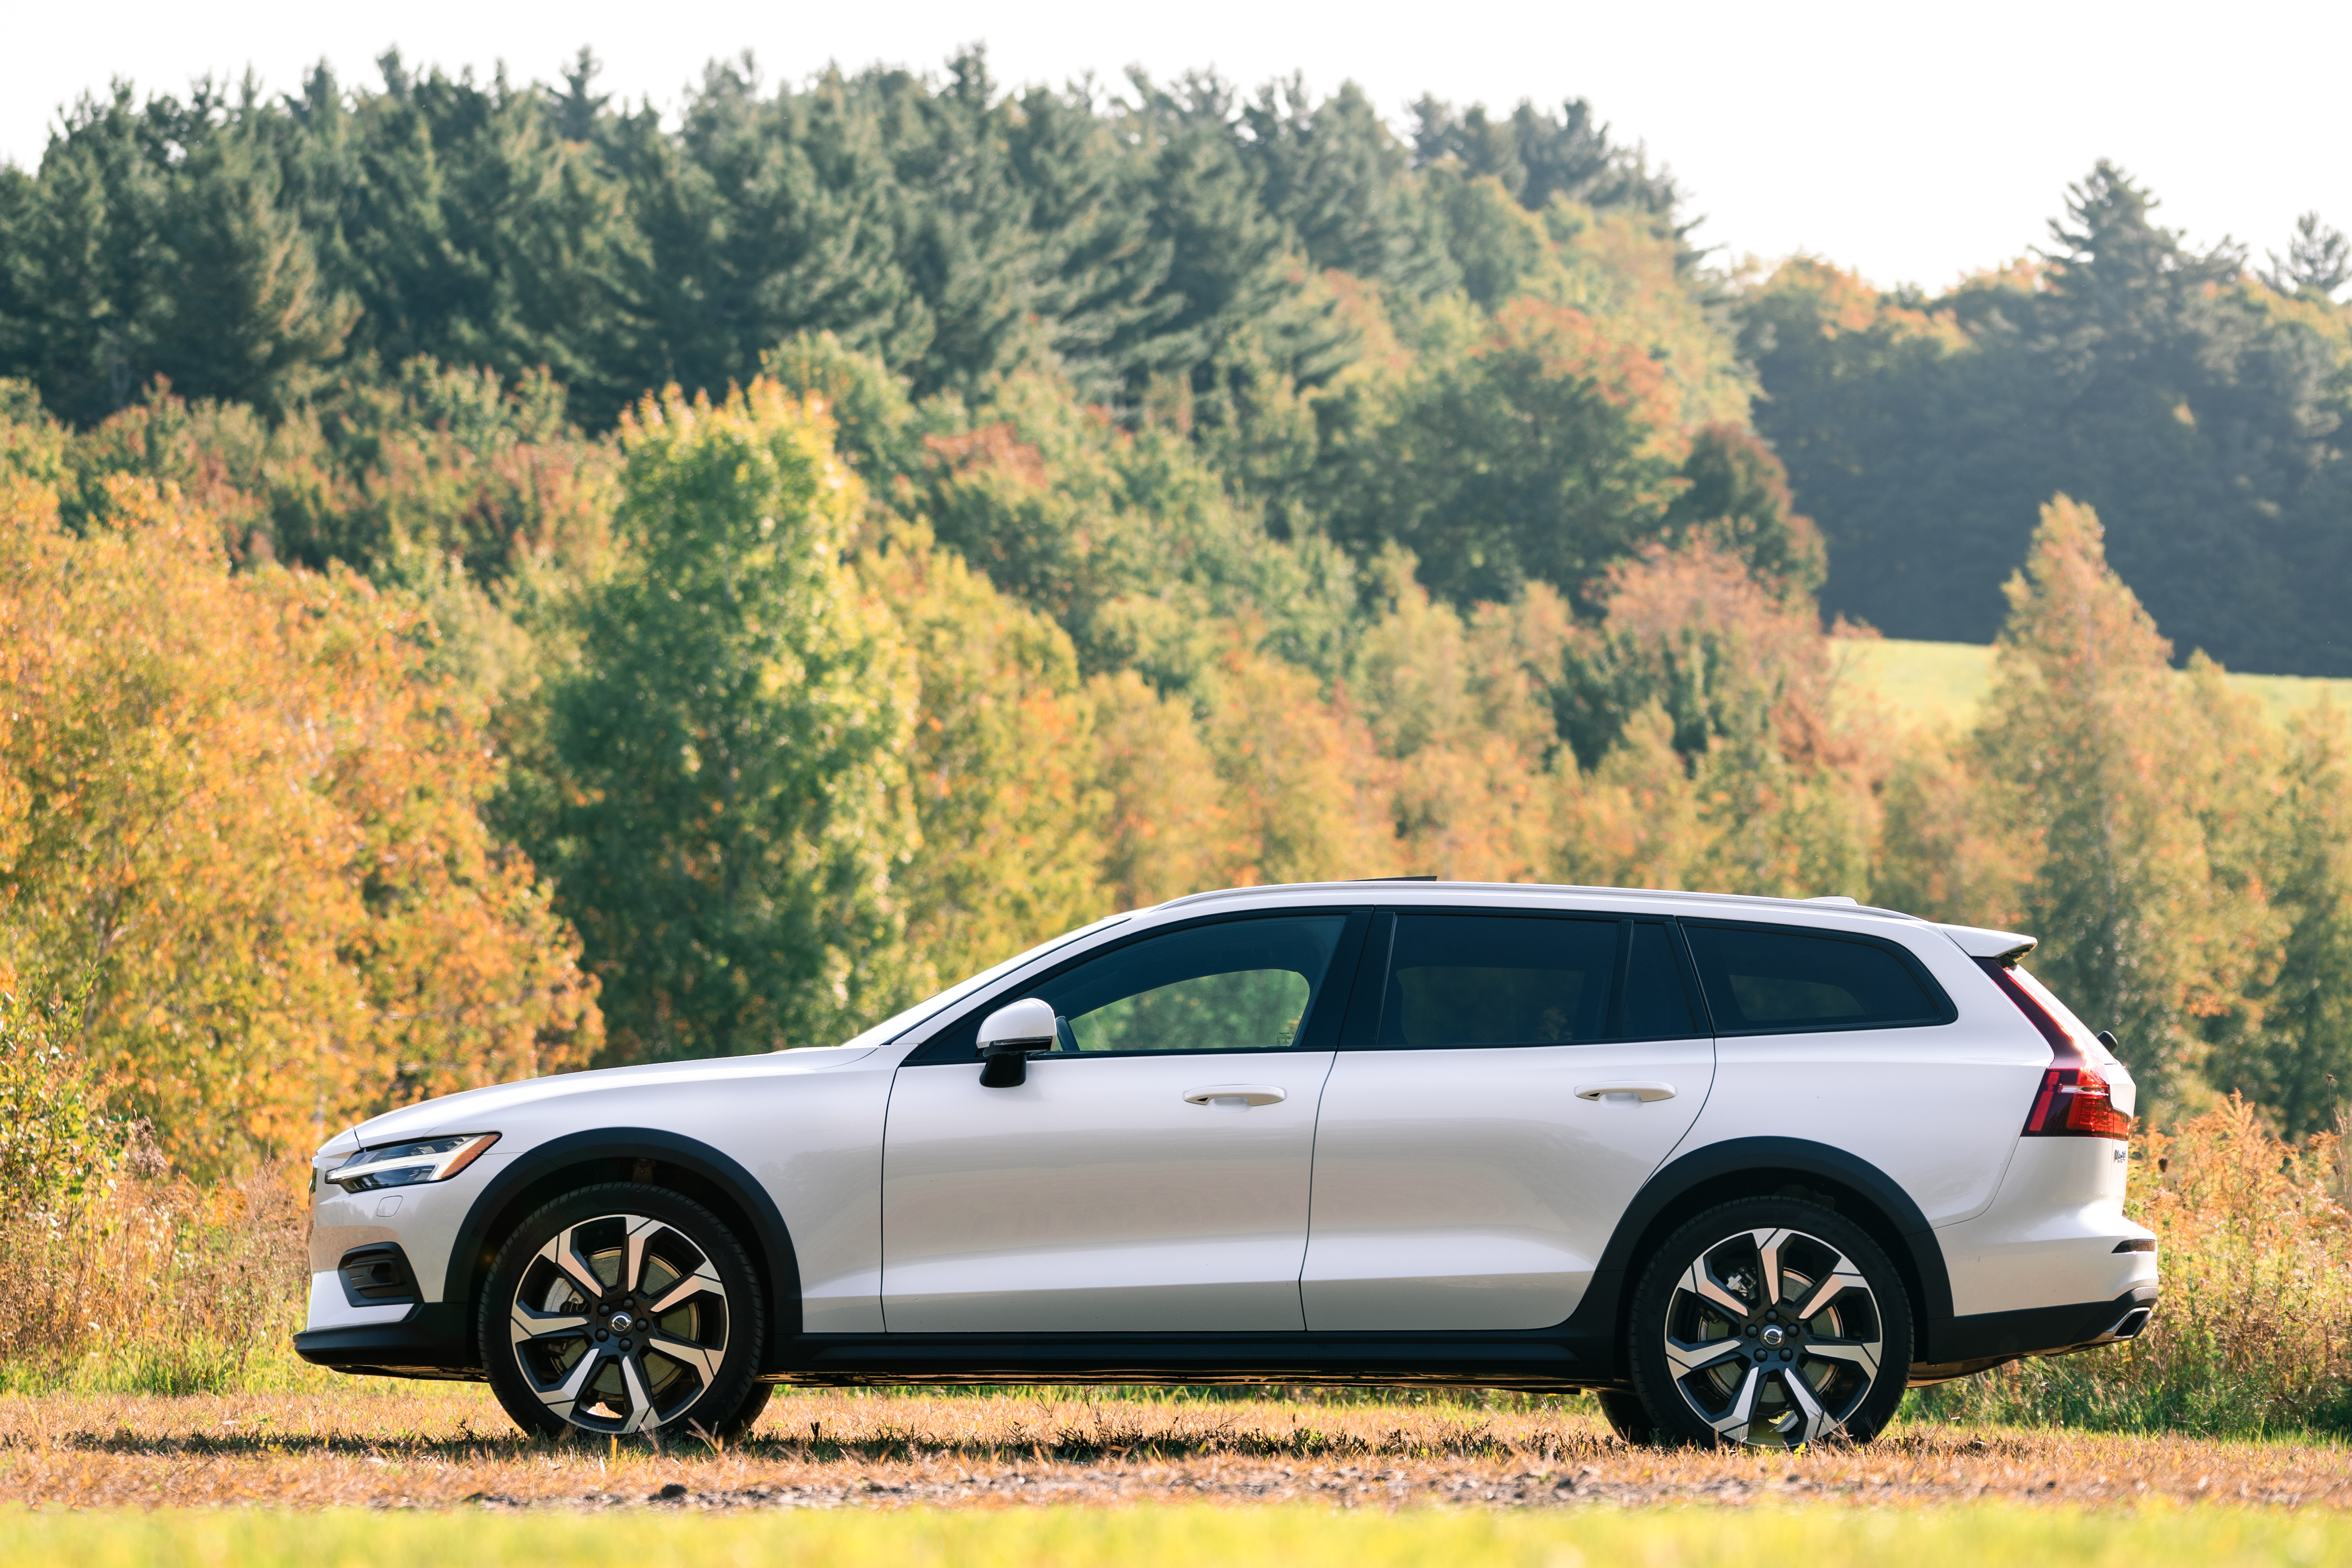 2020 Volvo V60 Cross Country is as butch as it is beautiful - CNET